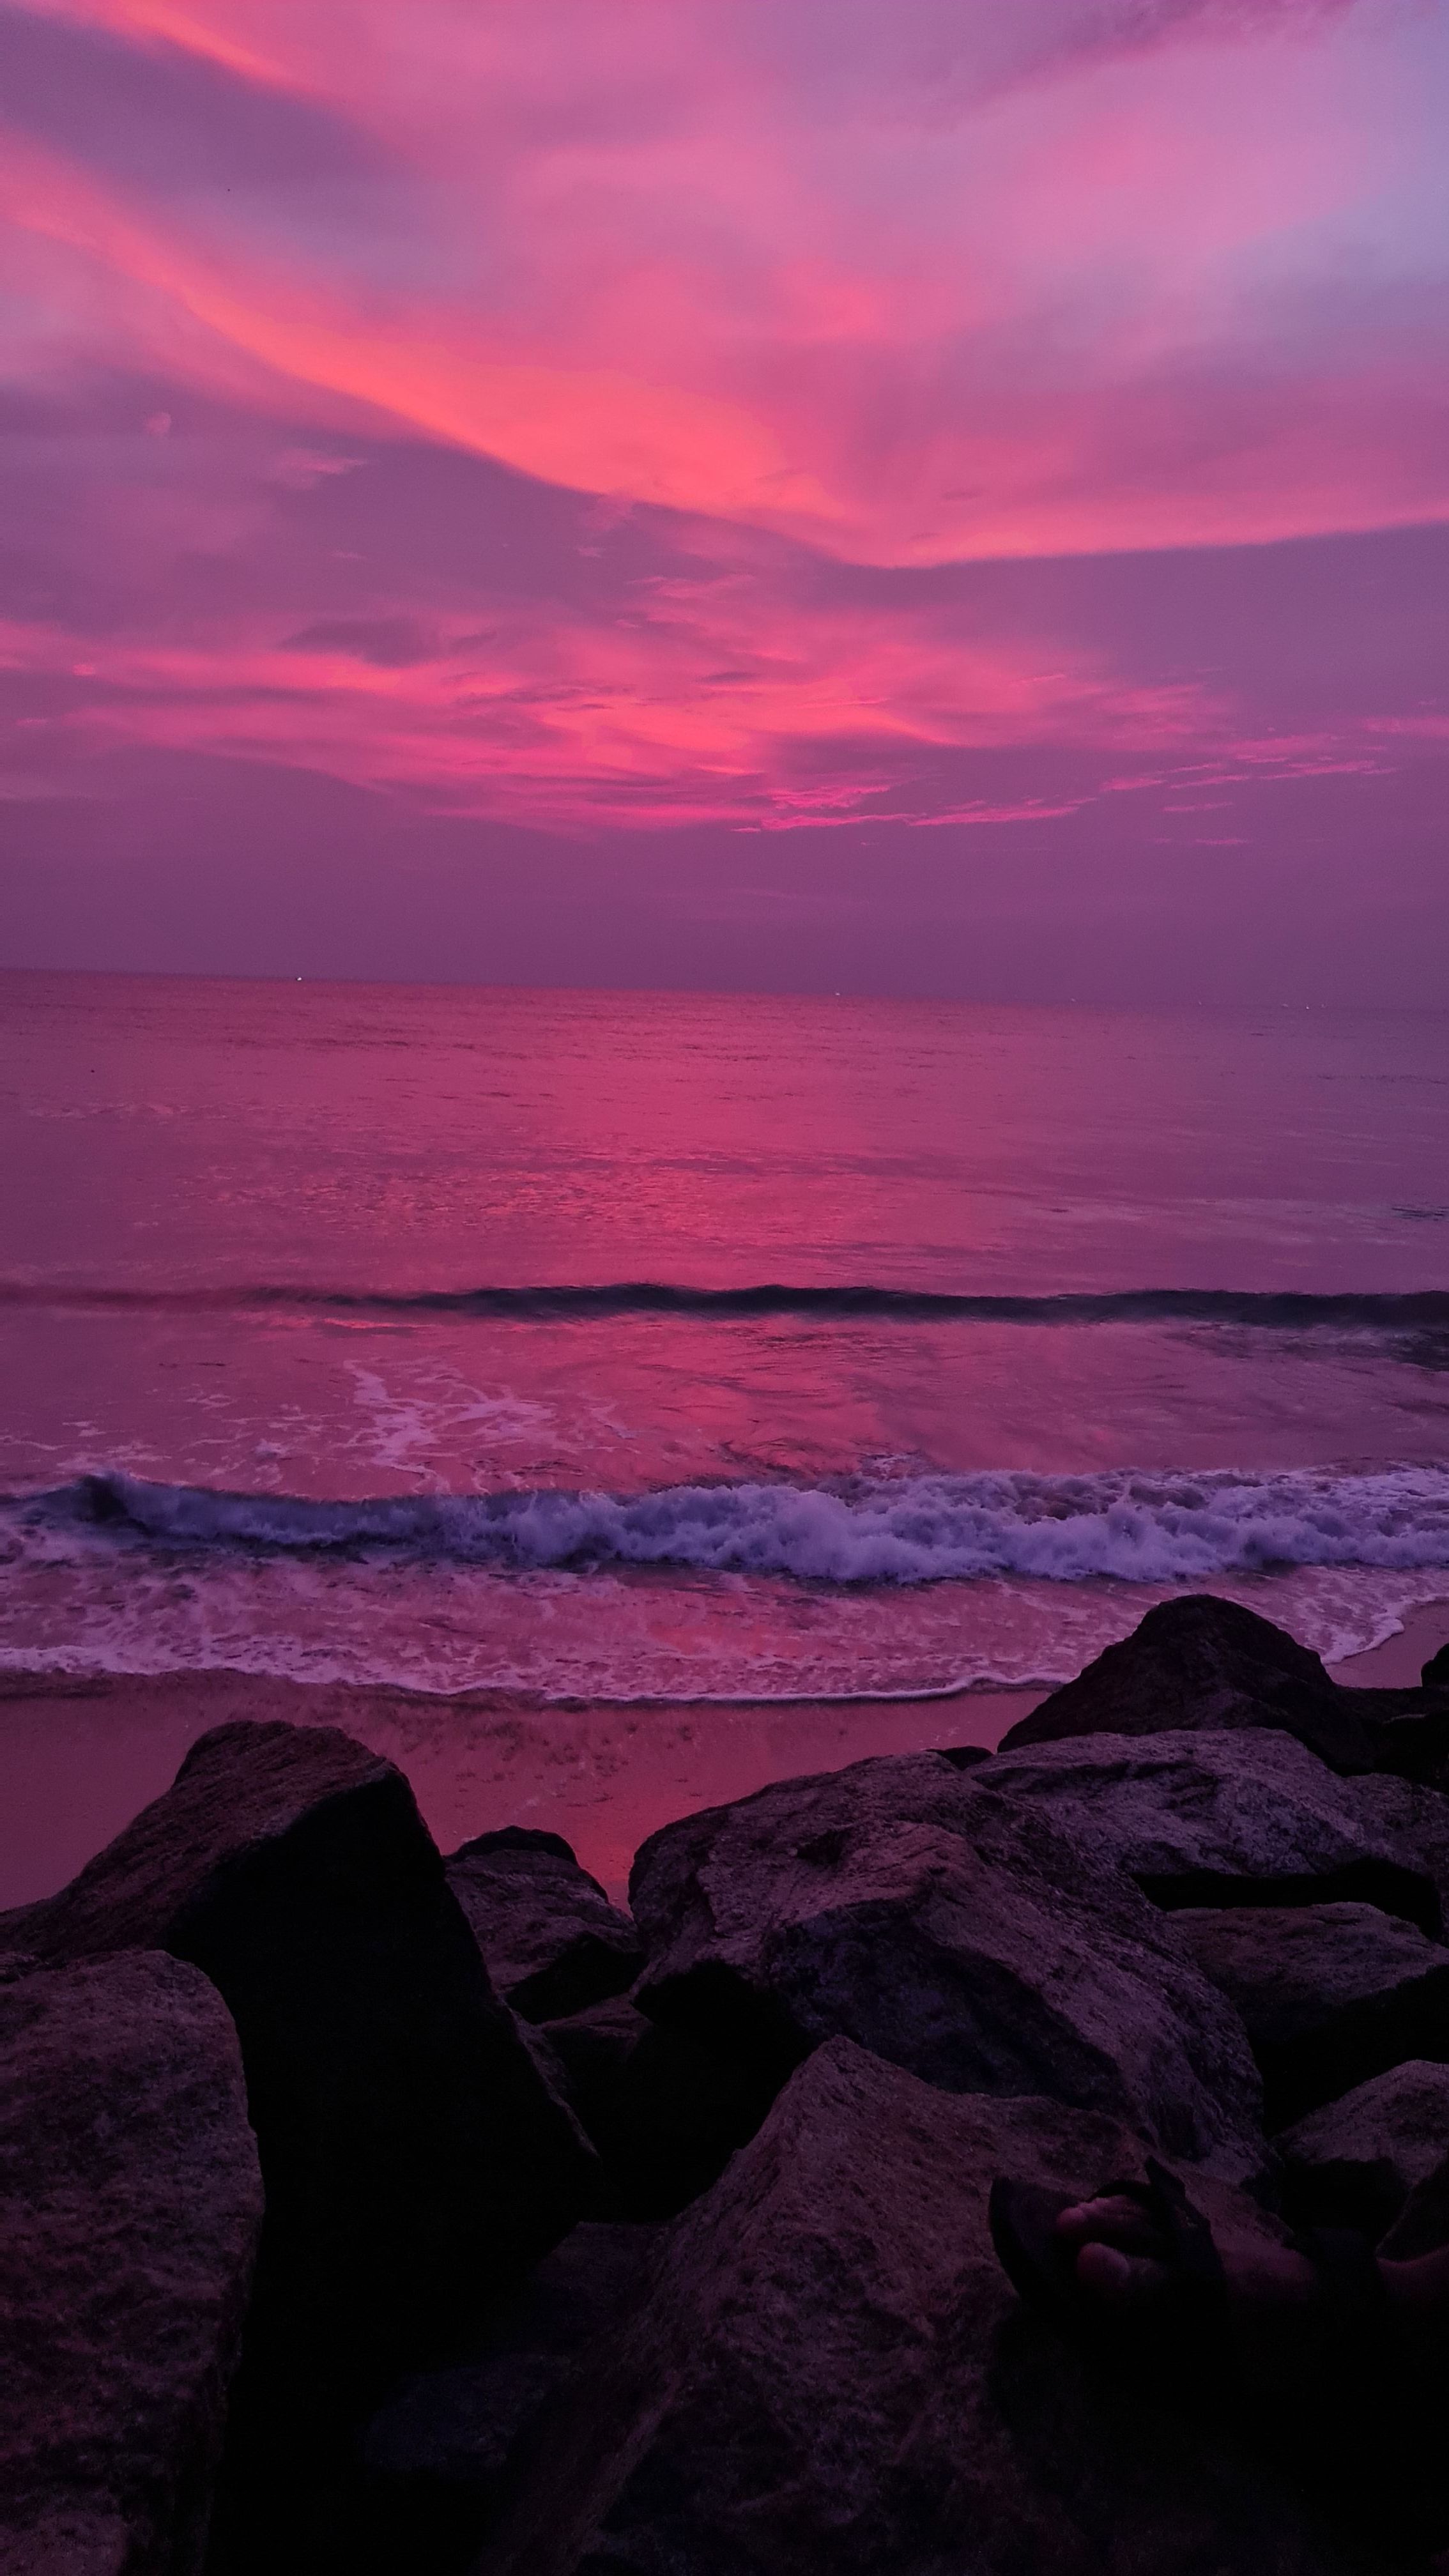 The pink sea